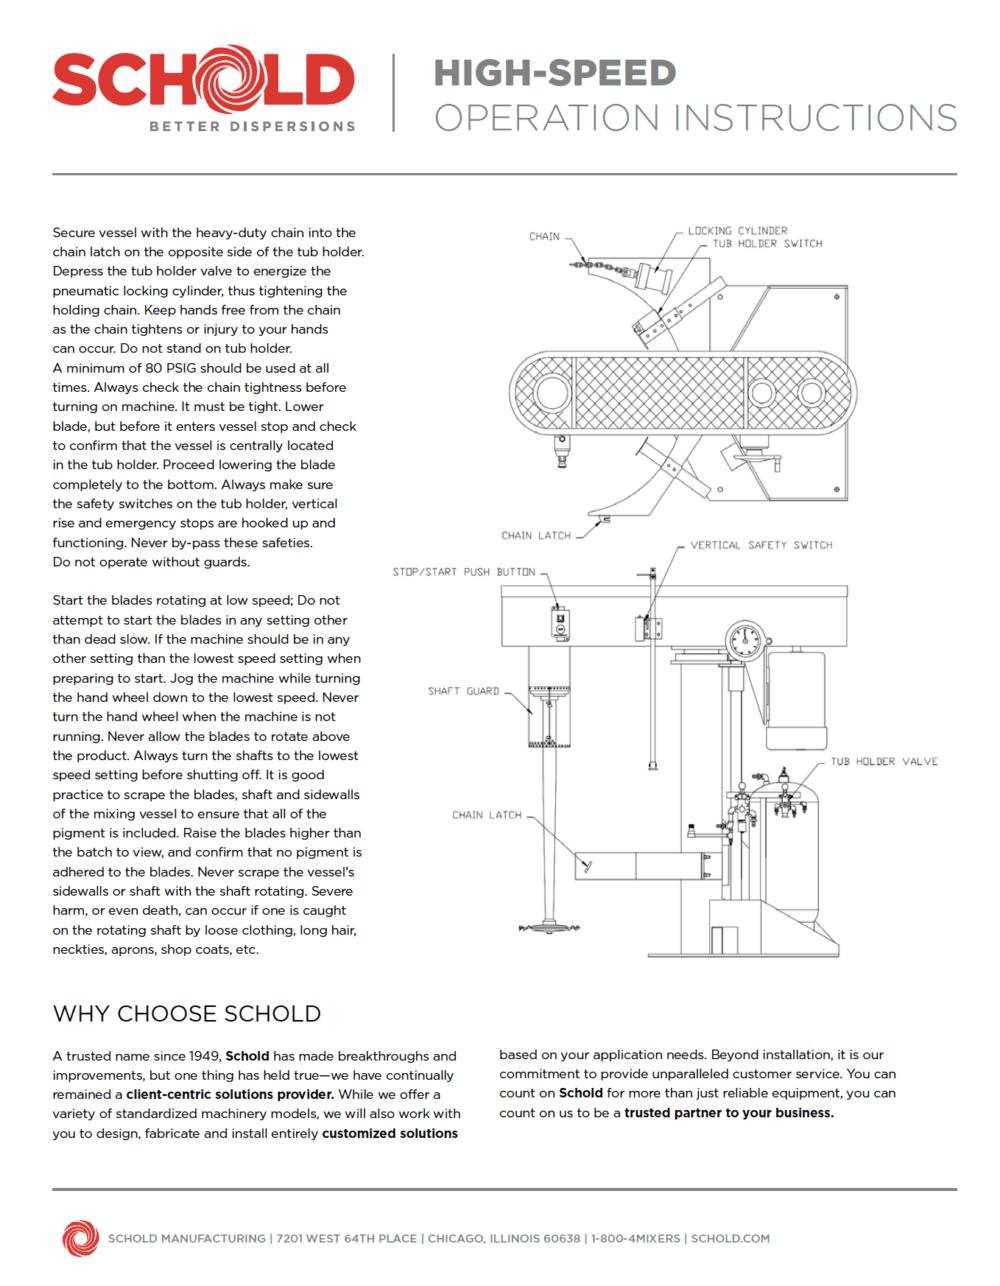 Schold High-Speed Operating Instructions